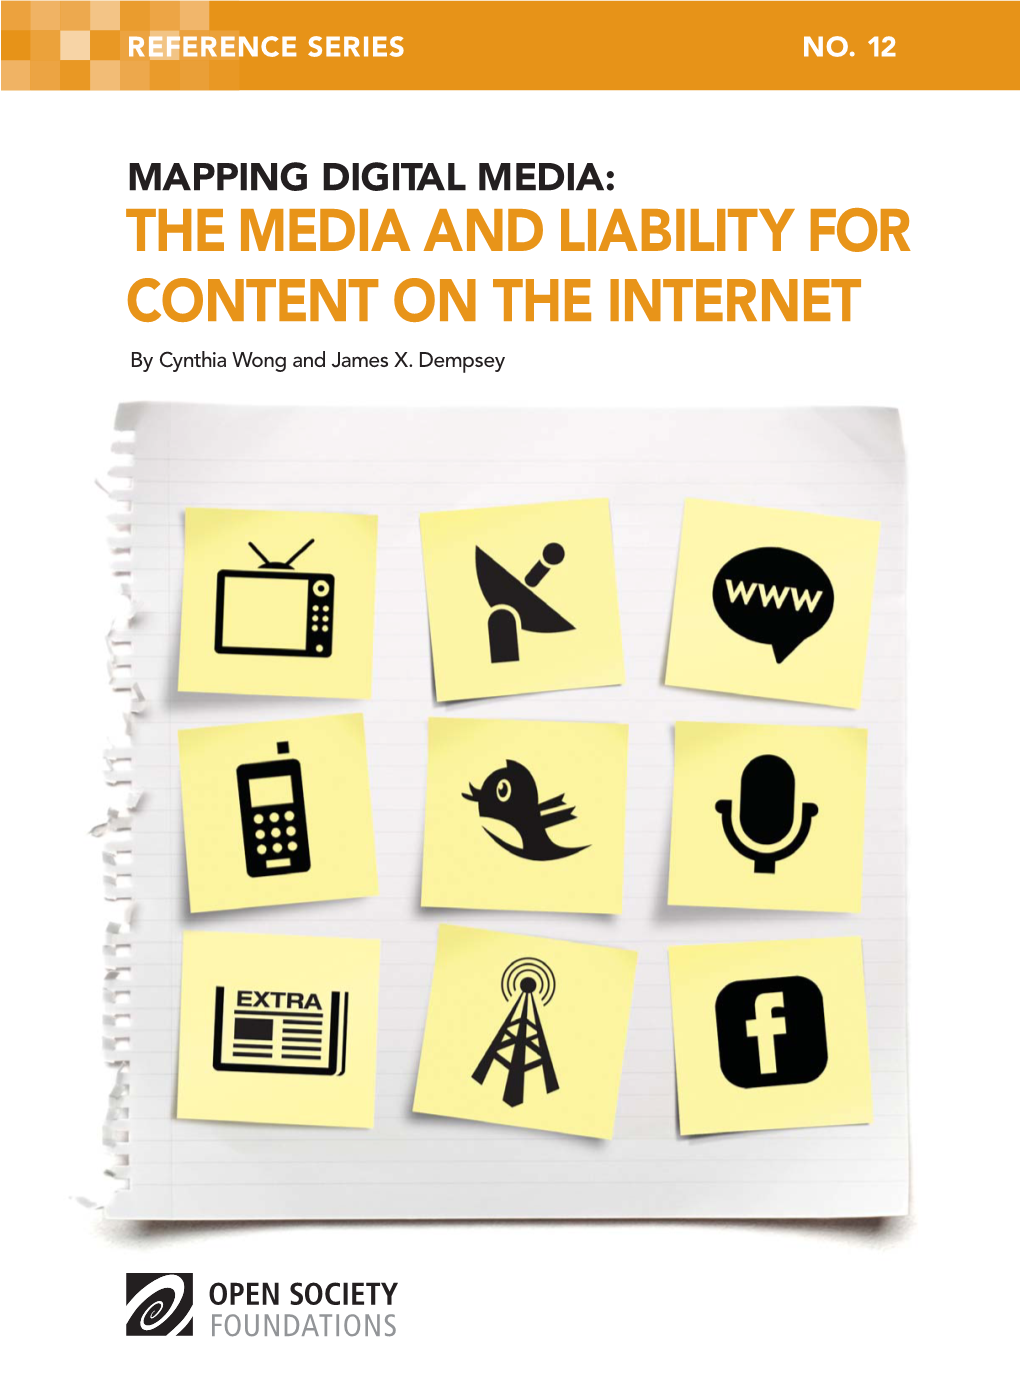 MAPPING DIGITAL MEDIA: the MEDIA and LIABILITY for CONTENT on the INTERNET by Cynthia Wong and James X